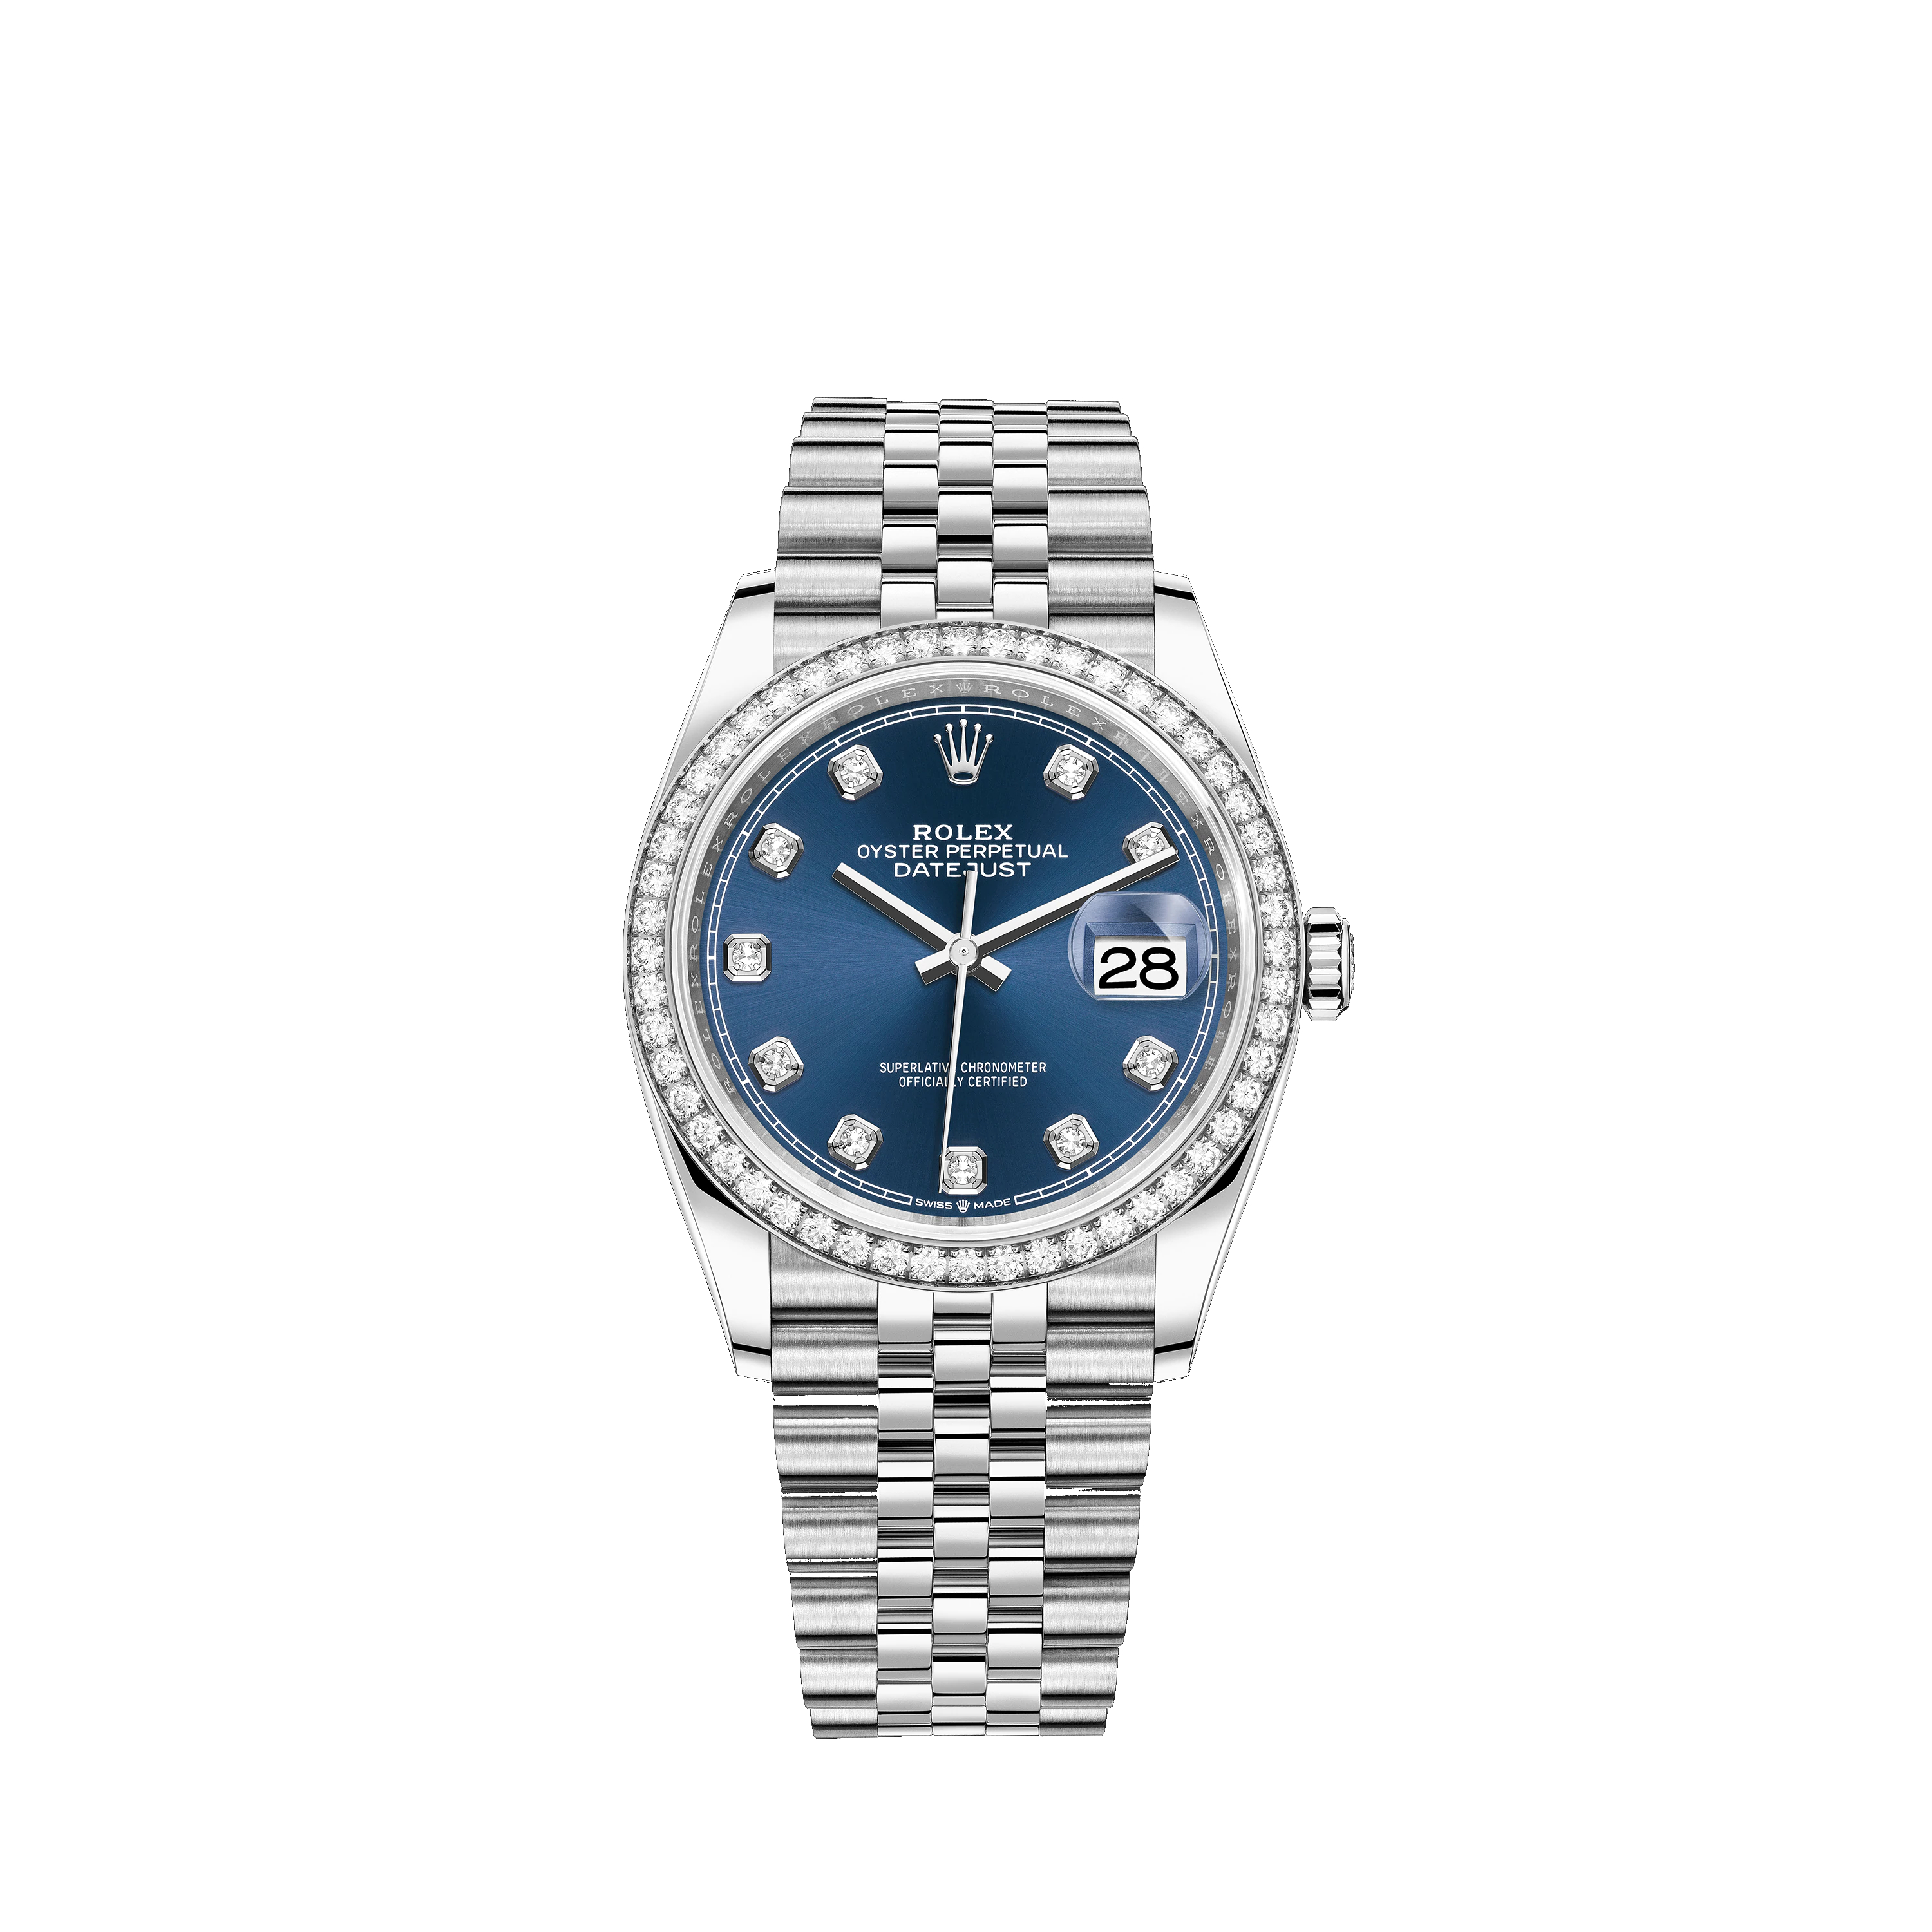 Datejust 36 126284RBR White Gold, Stainless Steel & Diamonds Watch (Blue Set with Diamonds)